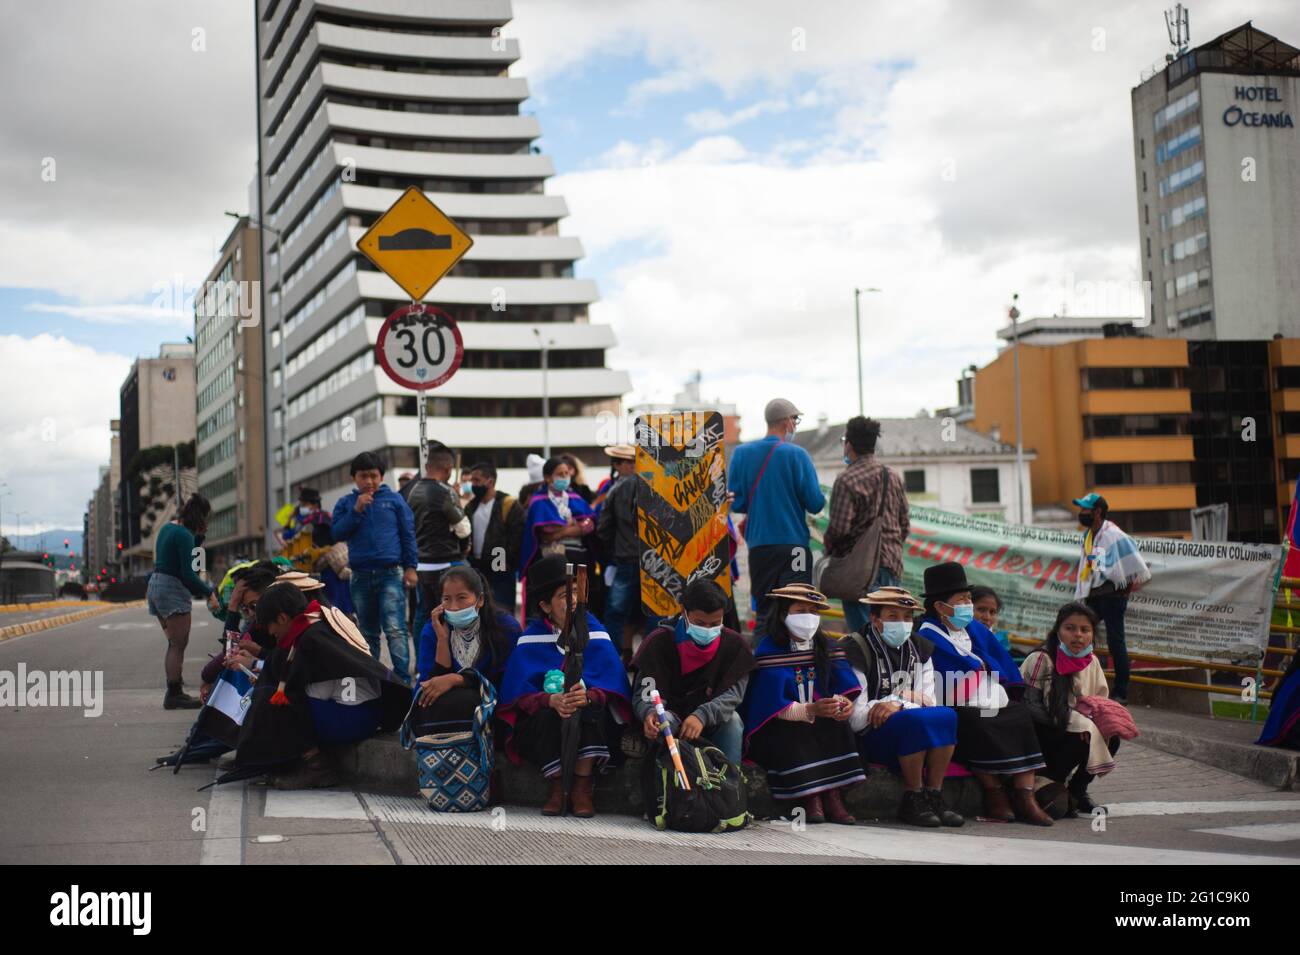 Bogota, Colombia. 06th June, 2021. Women of the Misak Indigenous communities participate in a protest as people and indigenous Misak community gather to wait for the arrival of the Inter-American Comission on Human Rights (CIDH) amid police brutality and unrest during anti-government protests that reach at least 70 dead in the past month of demonstrations, in Bogota, Colombia on June 6, 2021. Credit: Long Visual Press/Alamy Live News Stock Photo